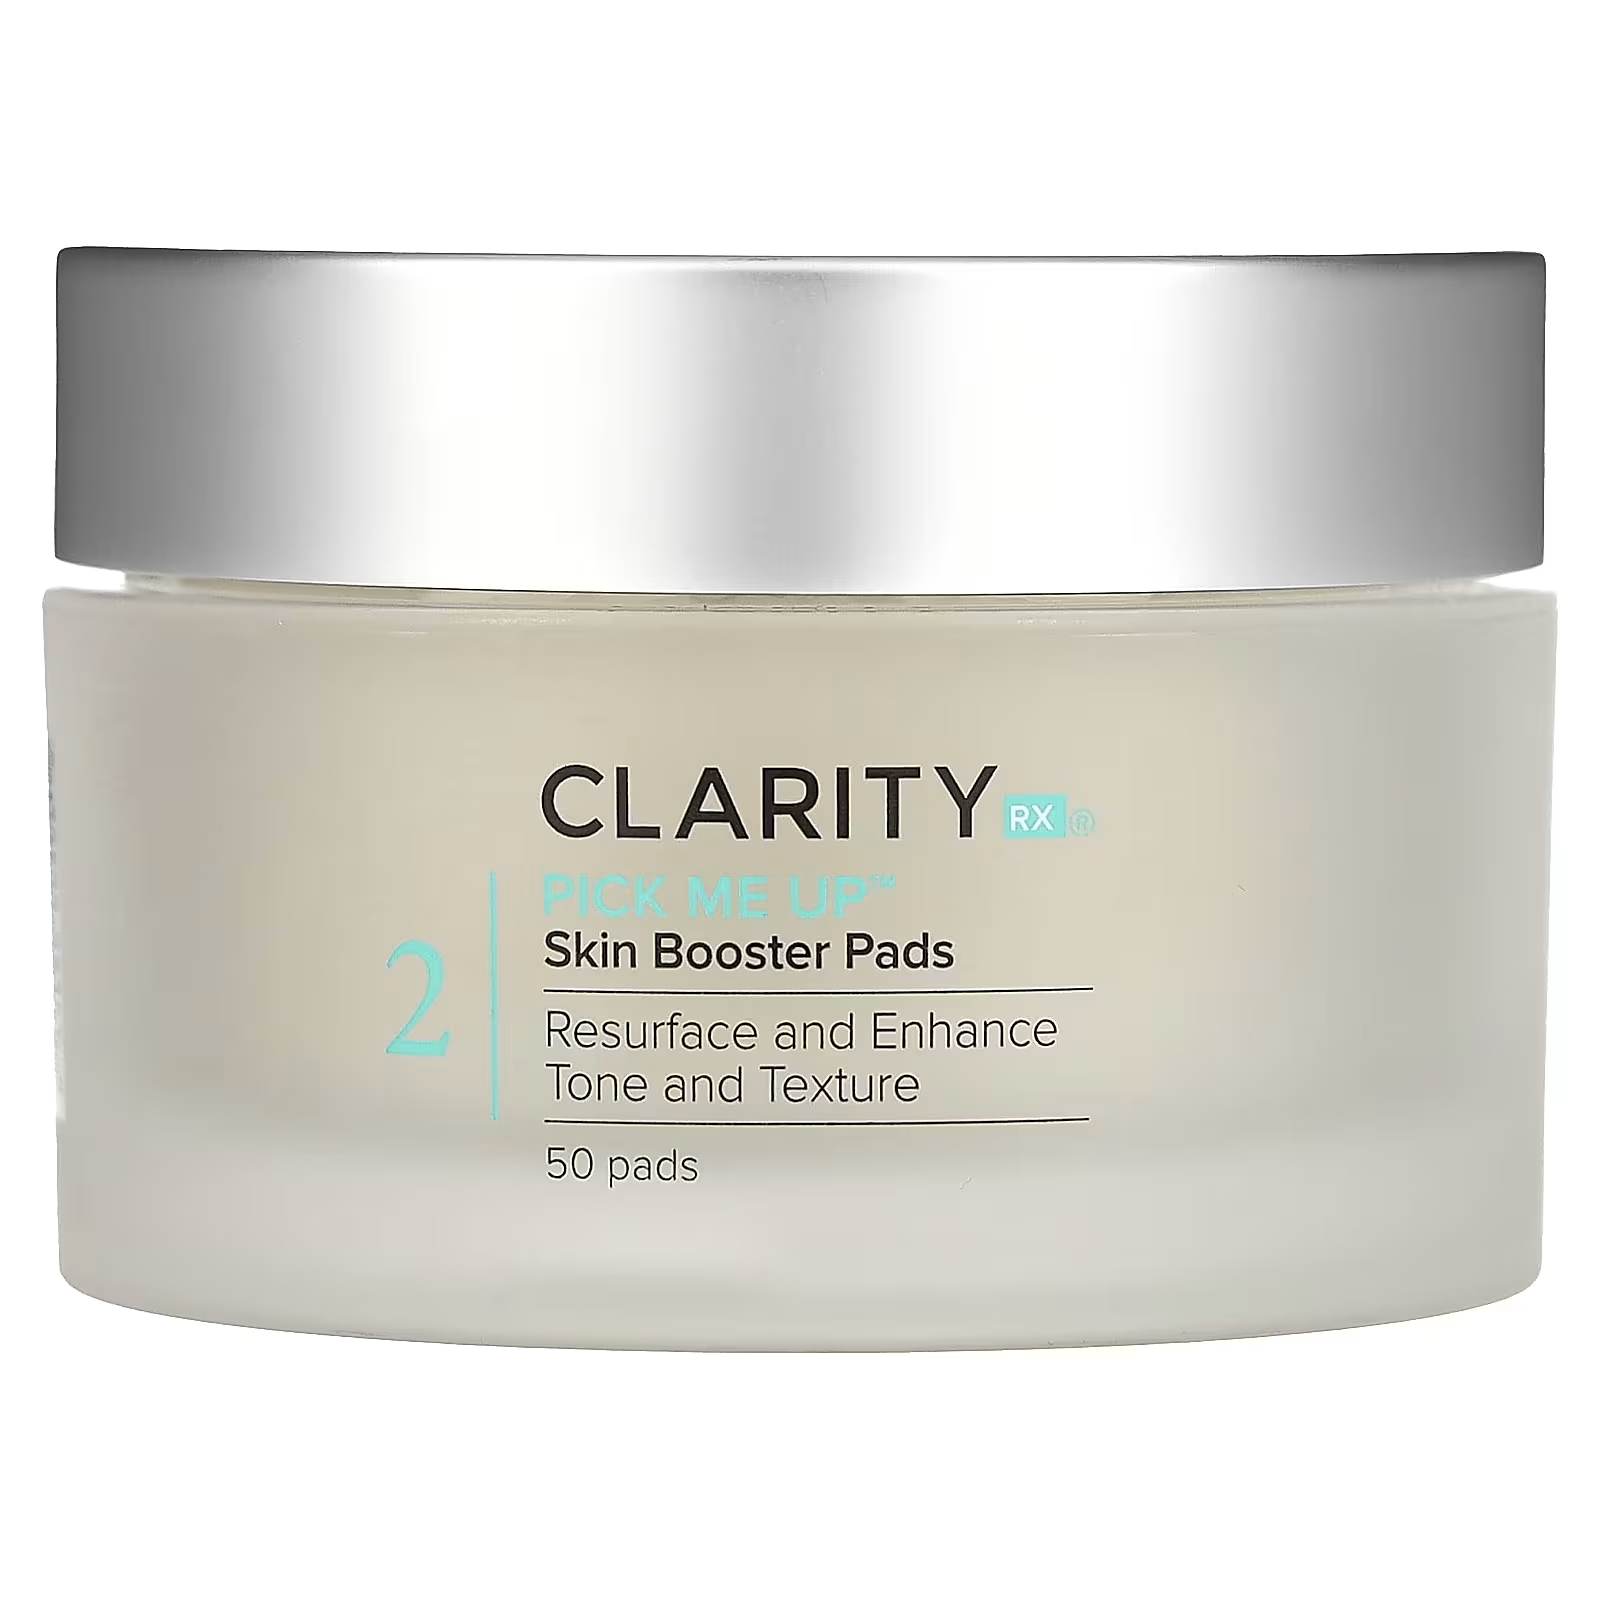 pick me up bunny ClarityRx Pick Me Up Skin Booster Pads 50 подушечек